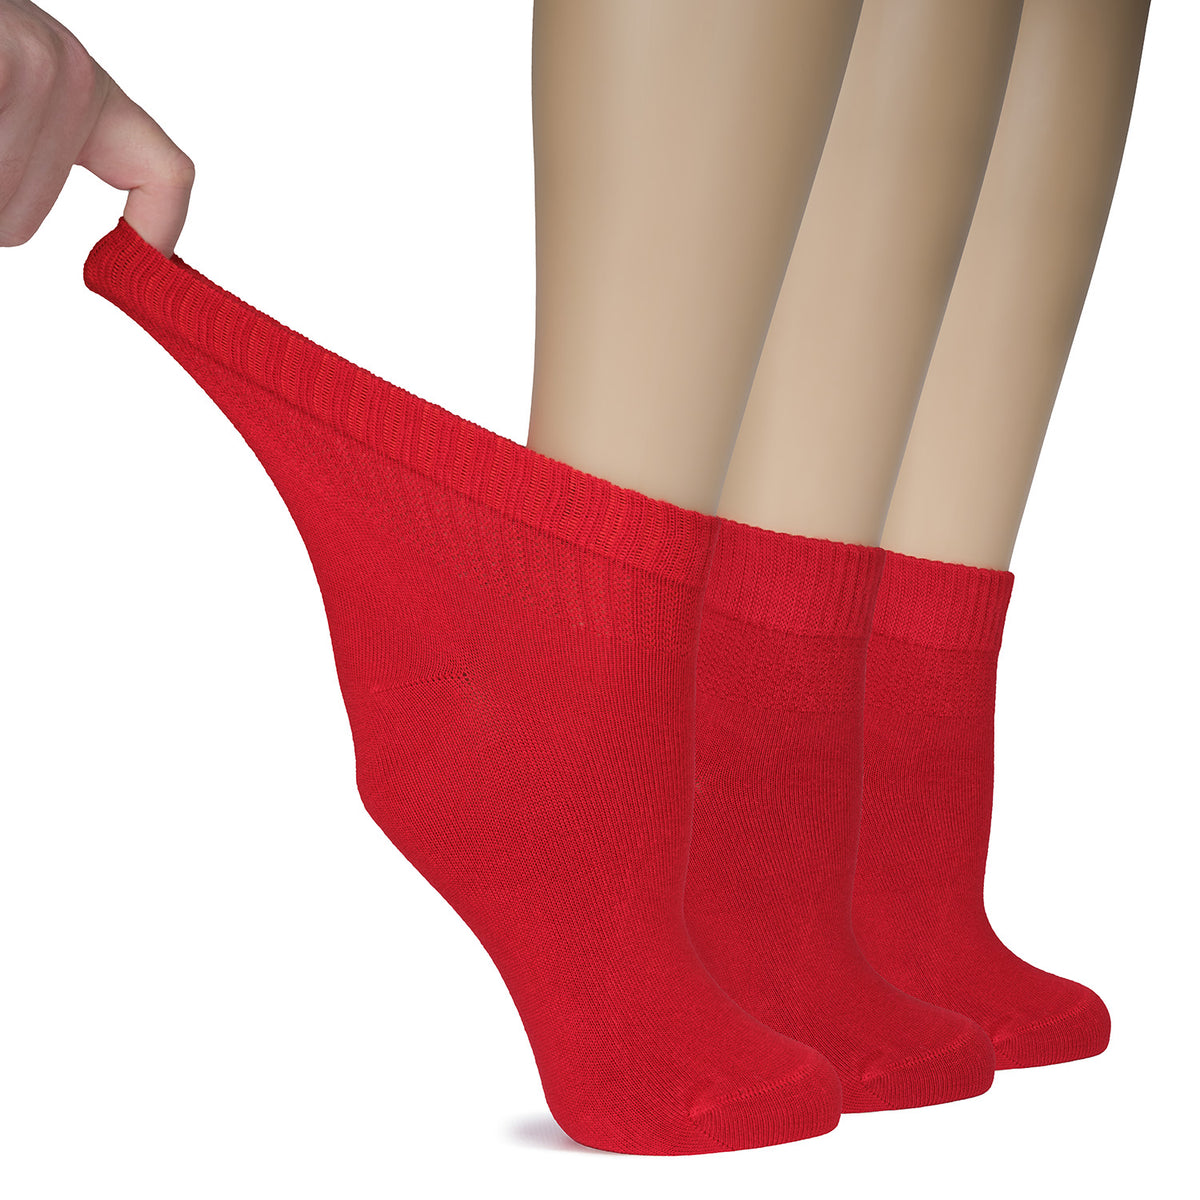 Three red Women's Diabetic Bamboo Ankle Socks are being held by someone, showcasing their softness and durability.